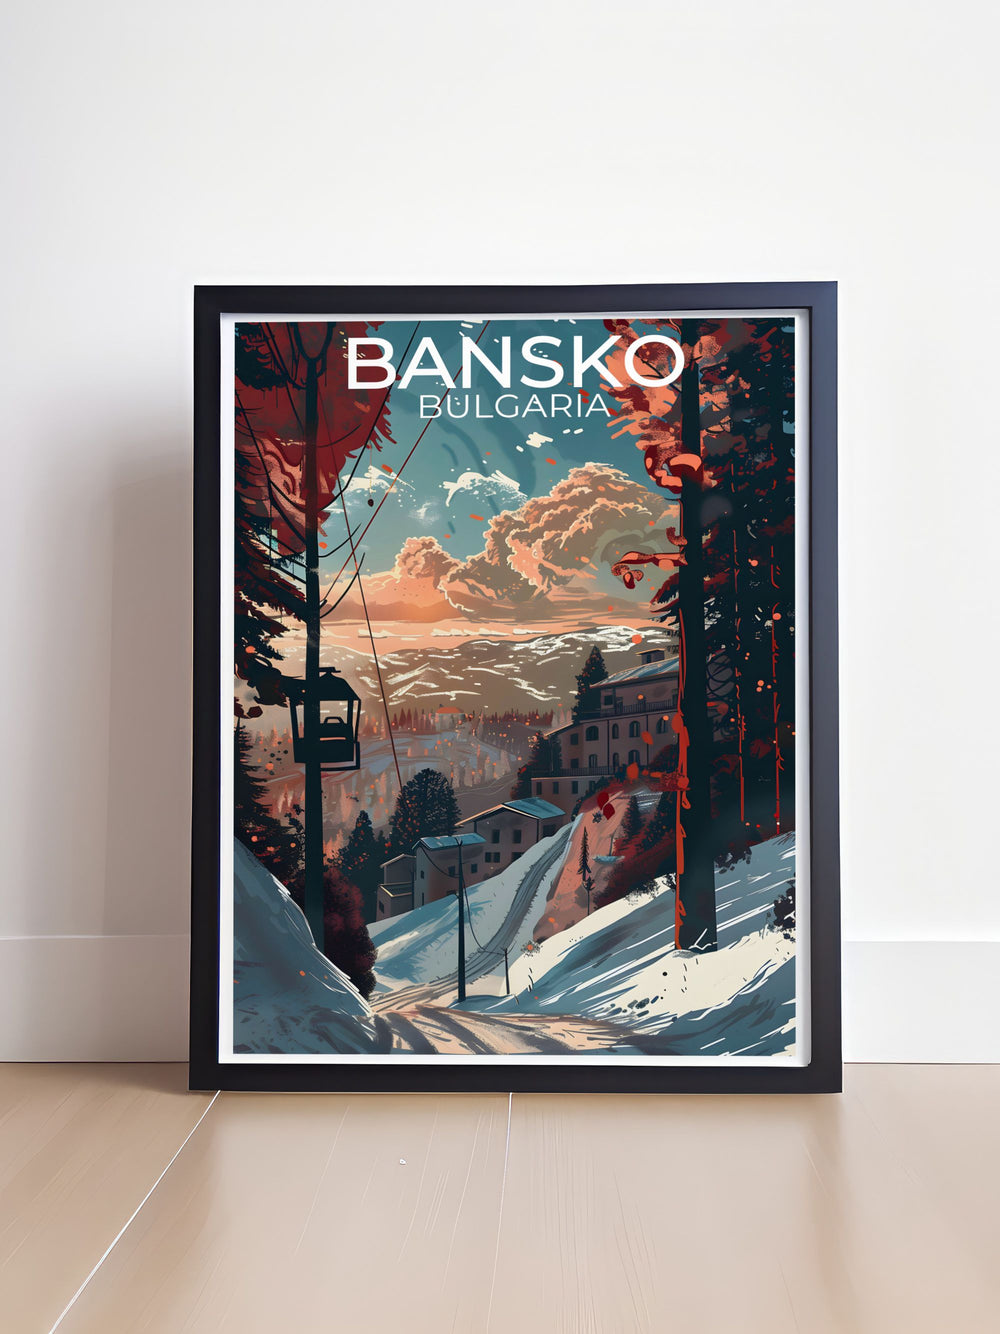 Highlighting the historical charm of Bansko Old Town, this travel poster features its well preserved architecture and cobblestone streets, ideal for history enthusiasts and home decor lovers.